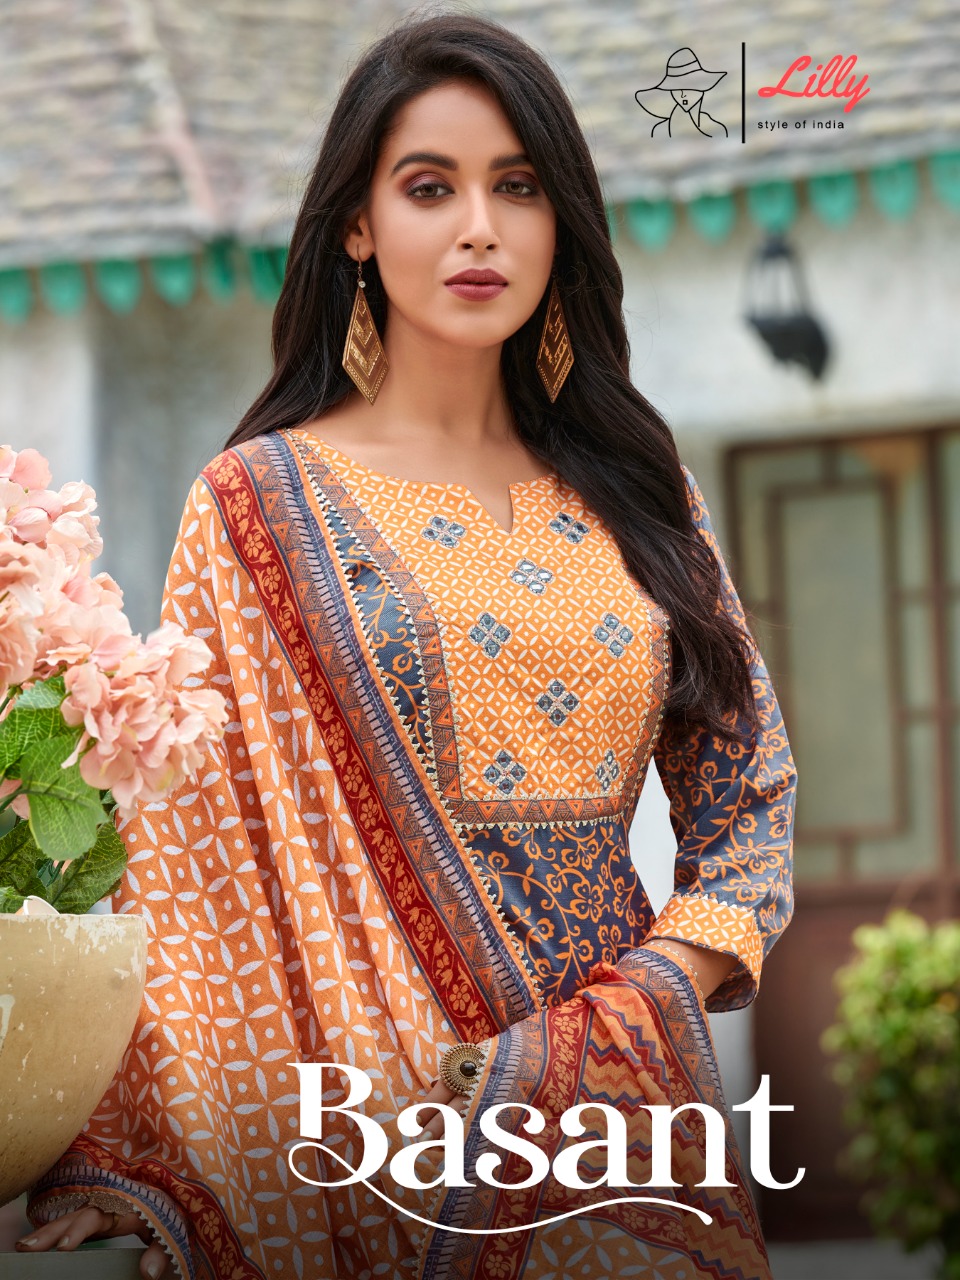 lilly style of india Basant linen cotton new and modern style top pent with dupatta catalog